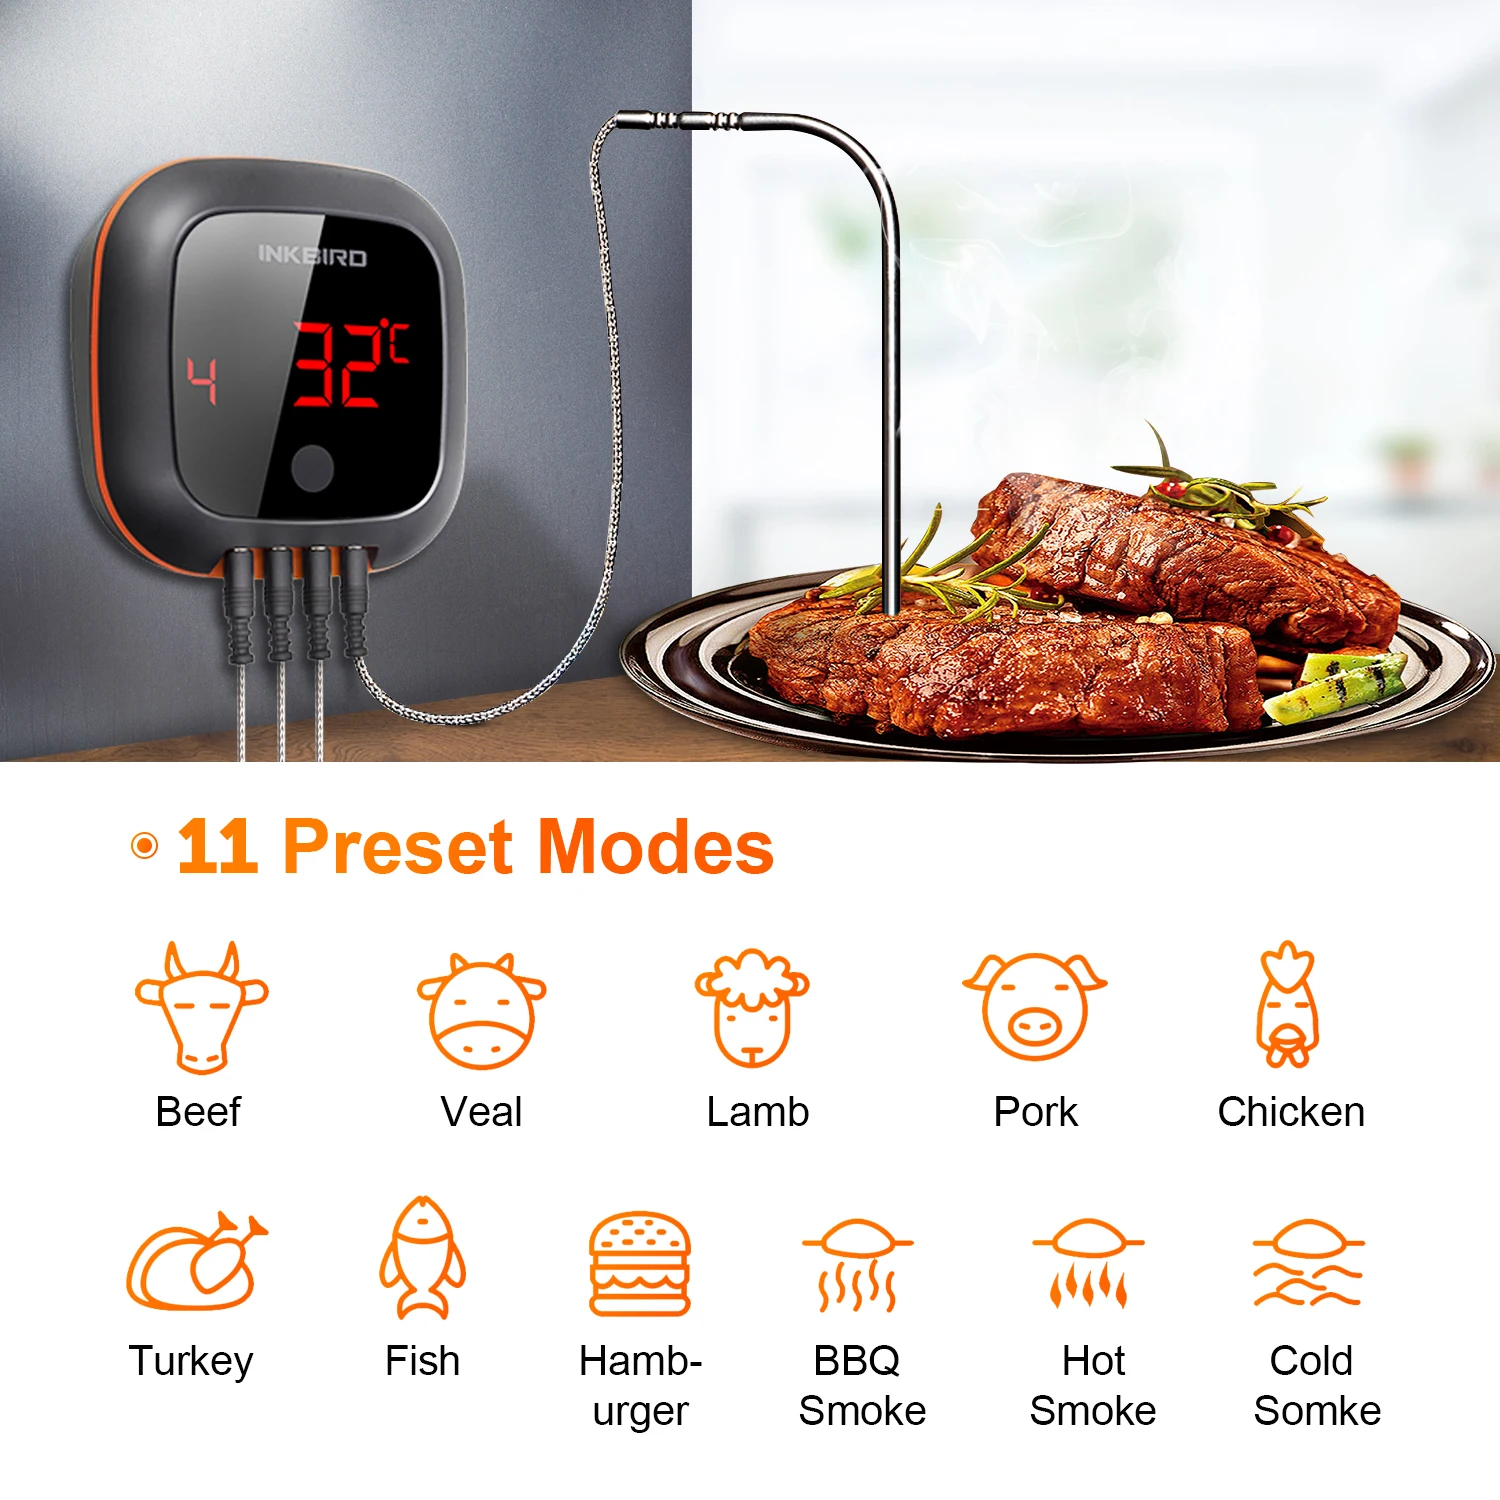 https://ae01.alicdn.com/kf/S038f8428b9ab493fbc6fcba65b5538a6J/INKBIRD-IBT-4XS-Food-Meat-Cooking-Thermometers-for-BBQ-Grills-Oven-Temperature-Recorder-With-2-4.jpg